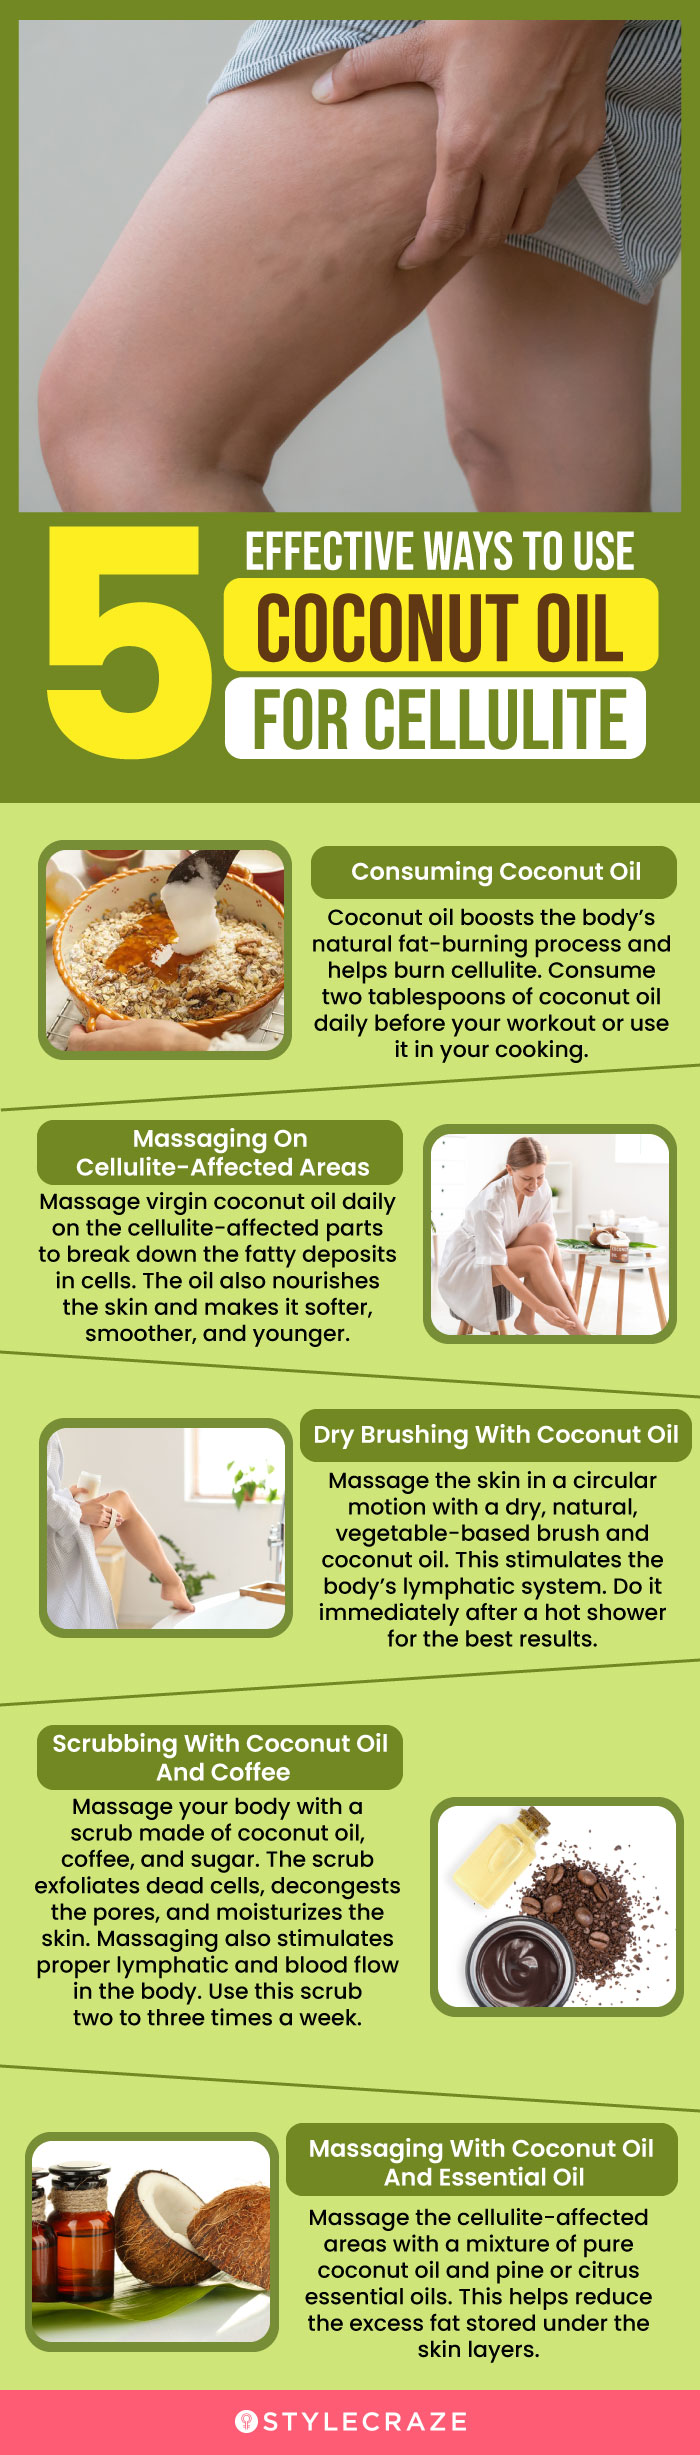 5 effective ways to use coconut oil for cellulite (infographic)